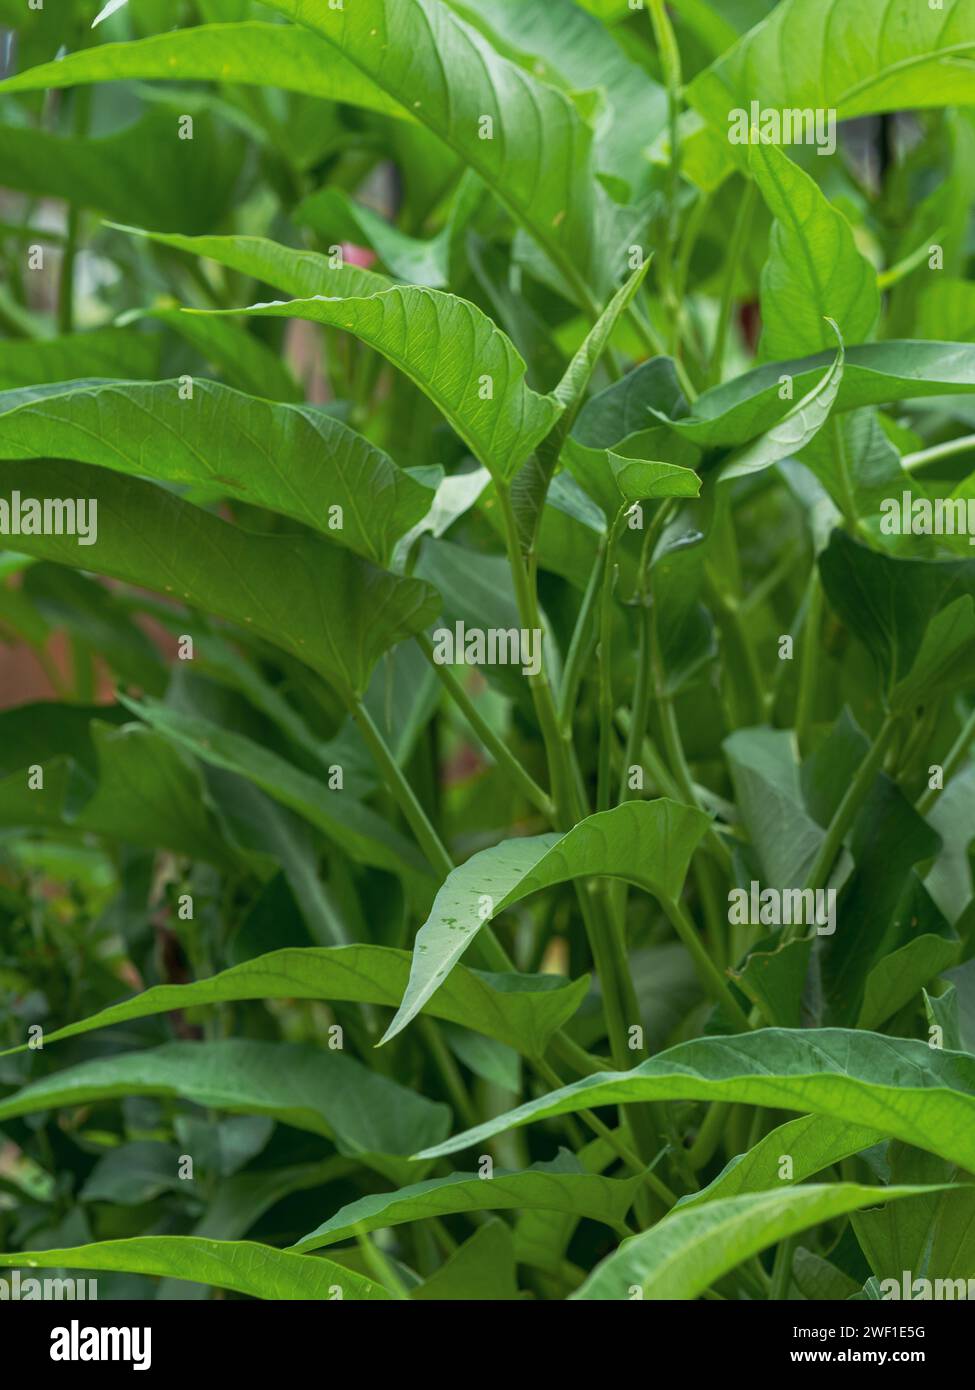 Kangkong Water Spinach, green leaf vegetable Stock Photo